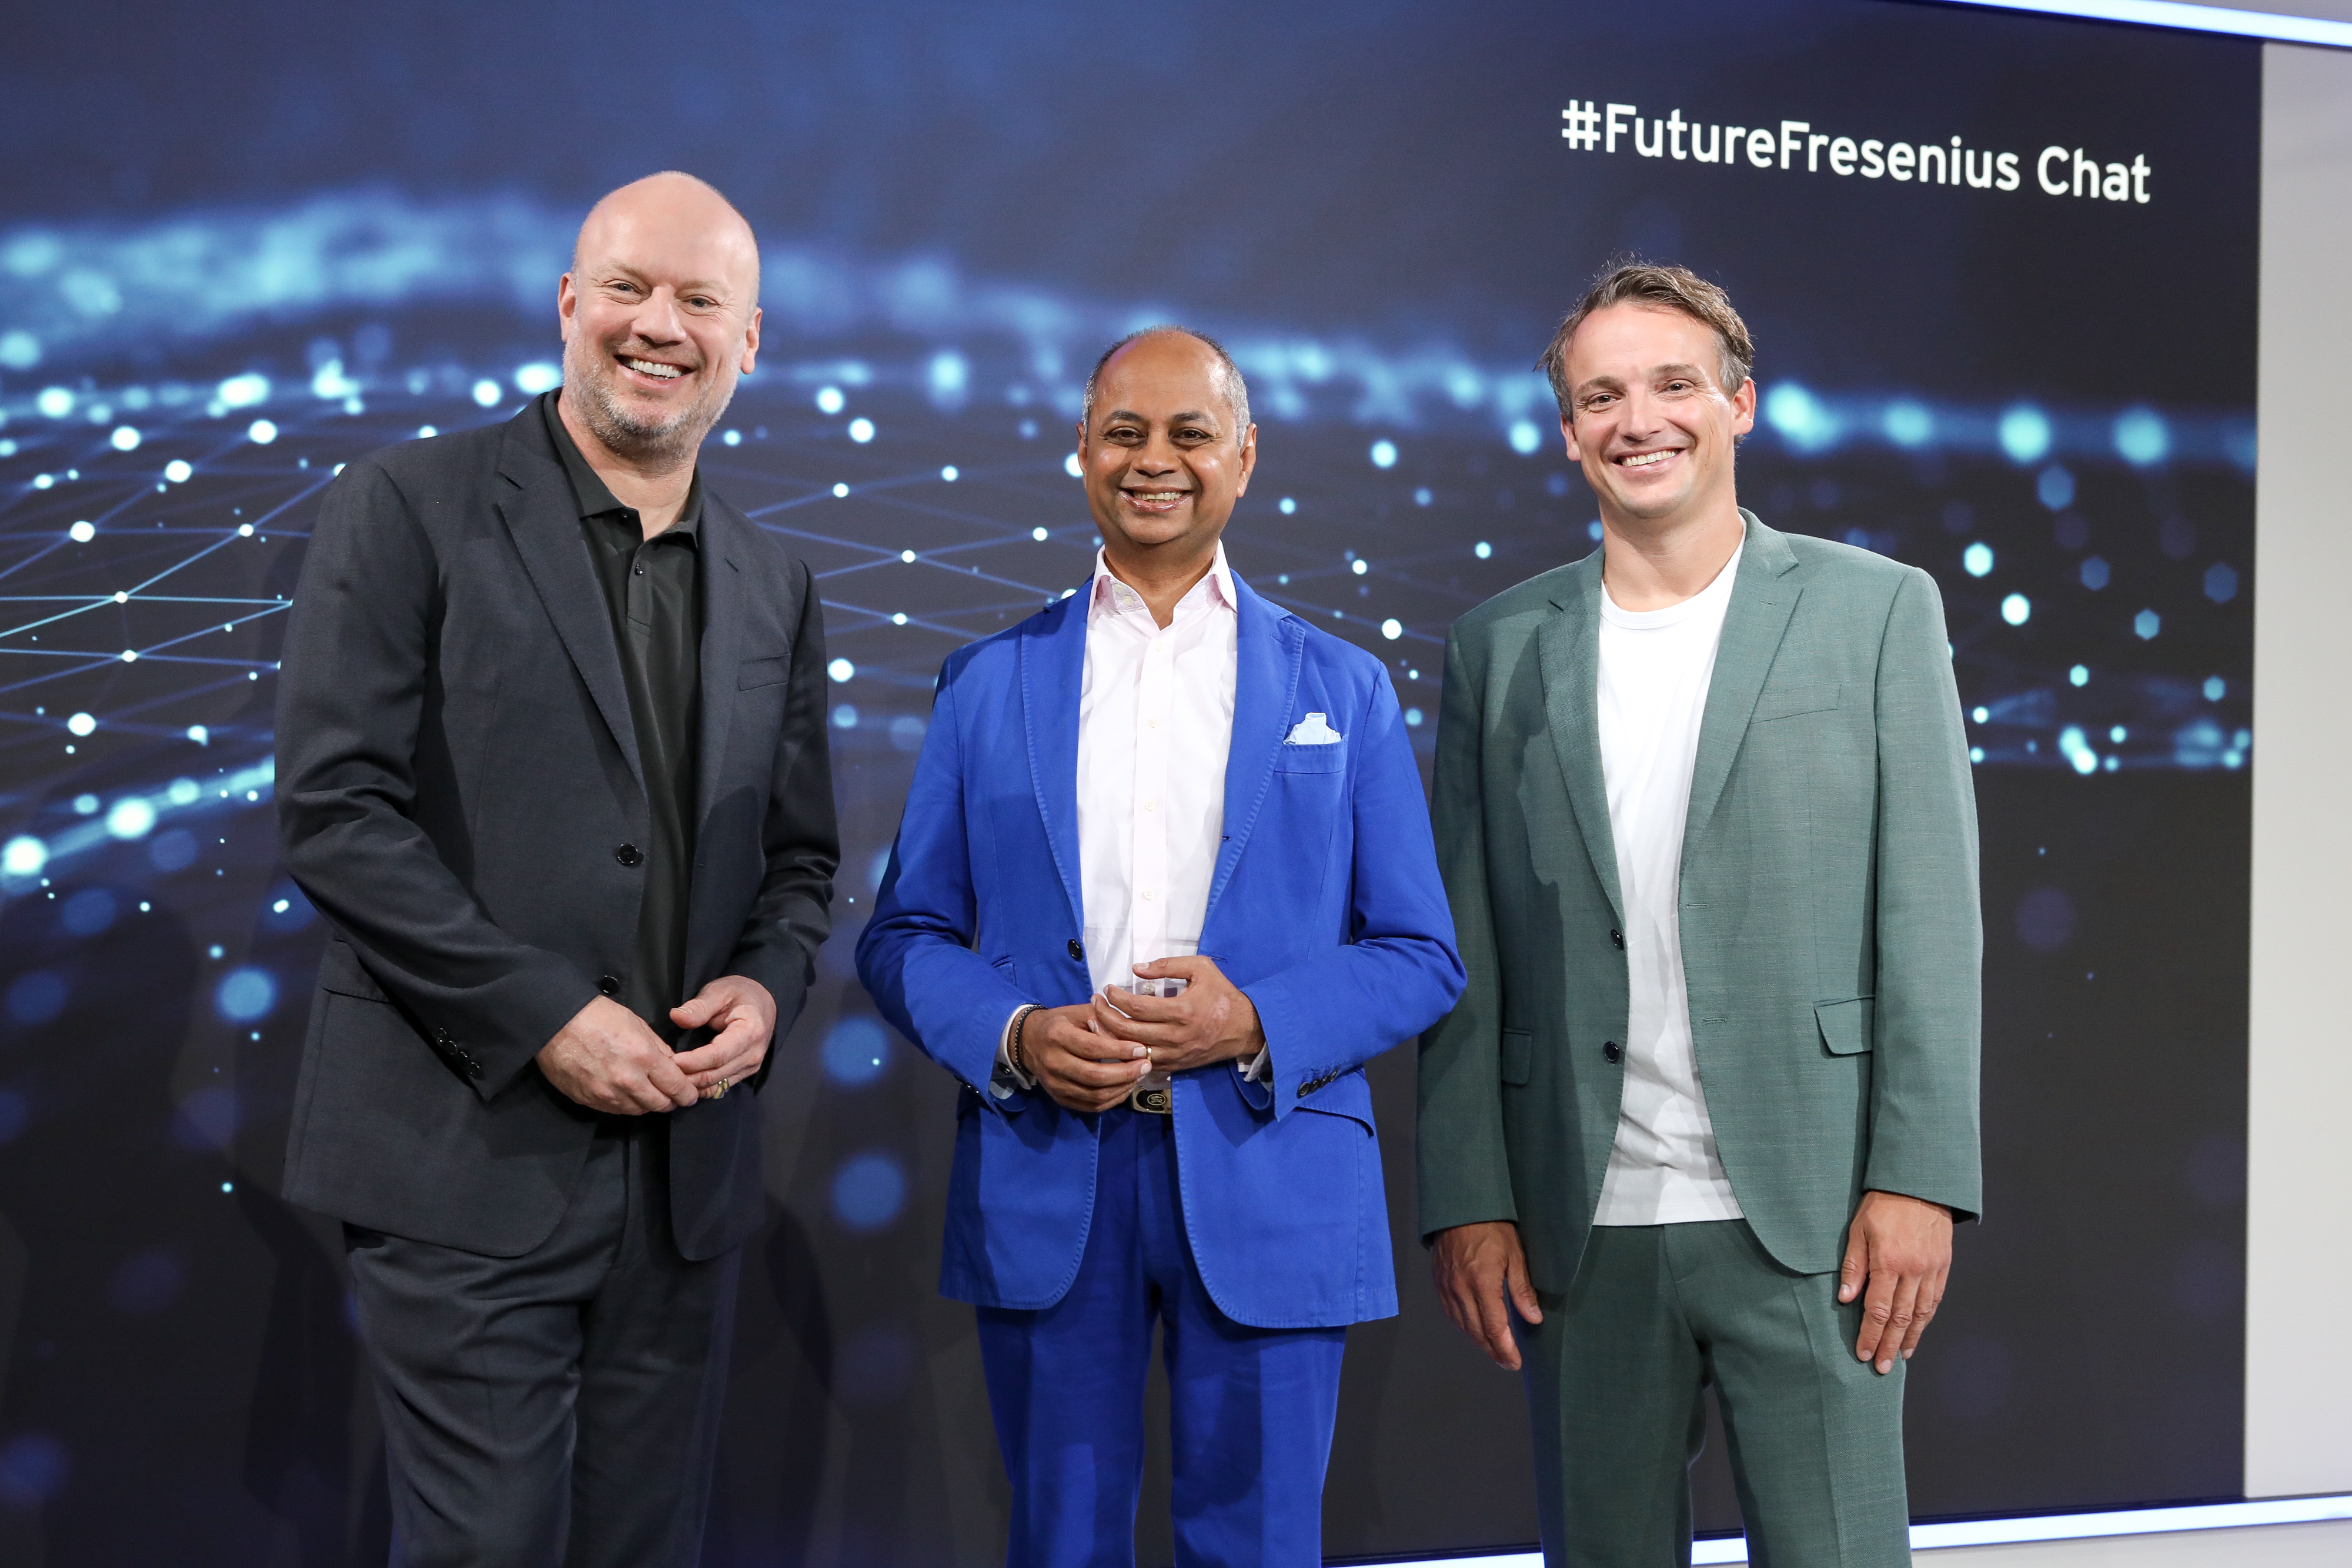 Fresenius moves more than 130 SAP systems to the cloud – a digitalization milestone on its #FutureFresenius journey